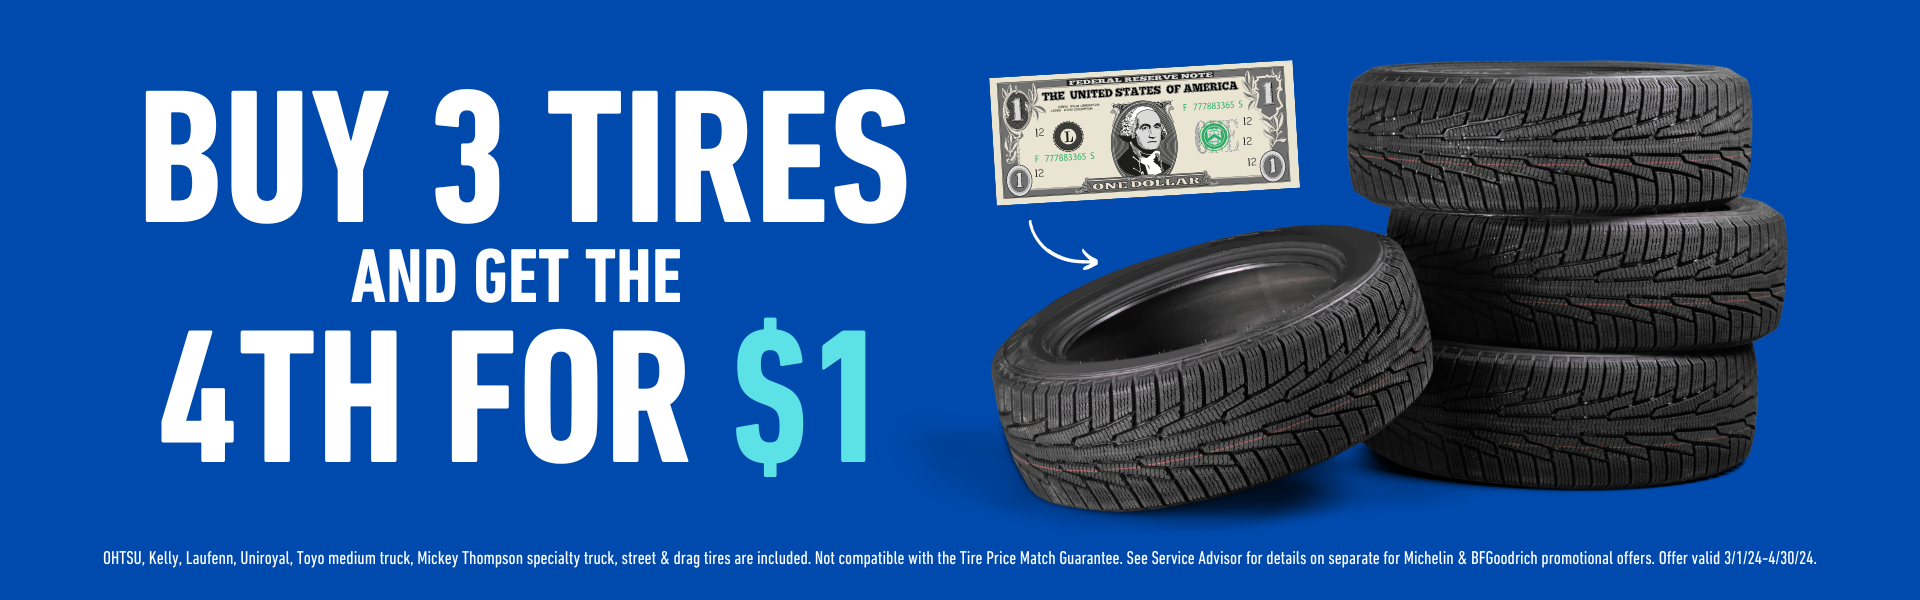 Guy 3 tires and get the 4th for $1